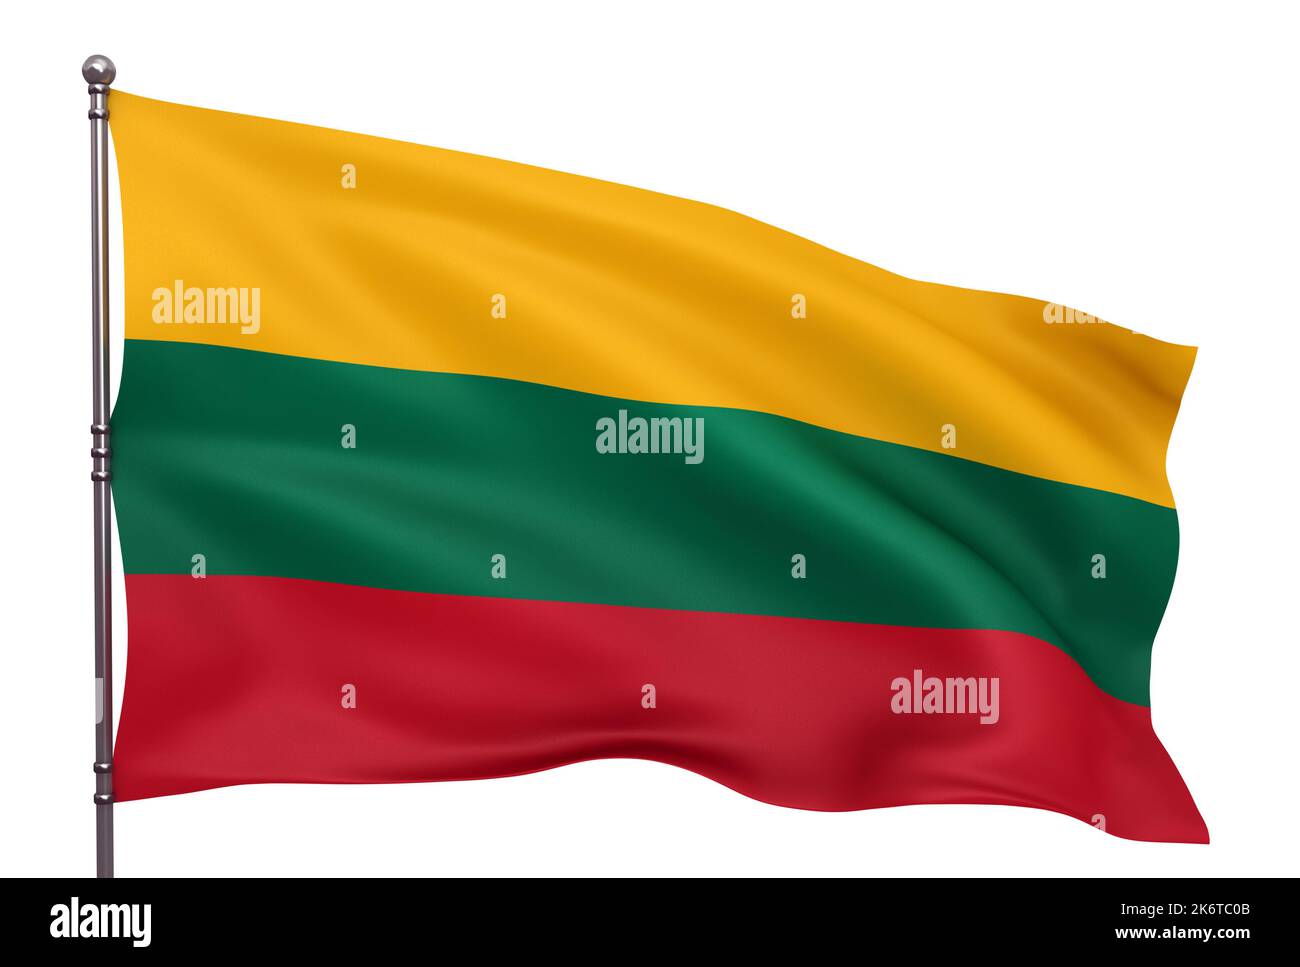 Waving Lithuanian flag isolated over white background Stock Photo